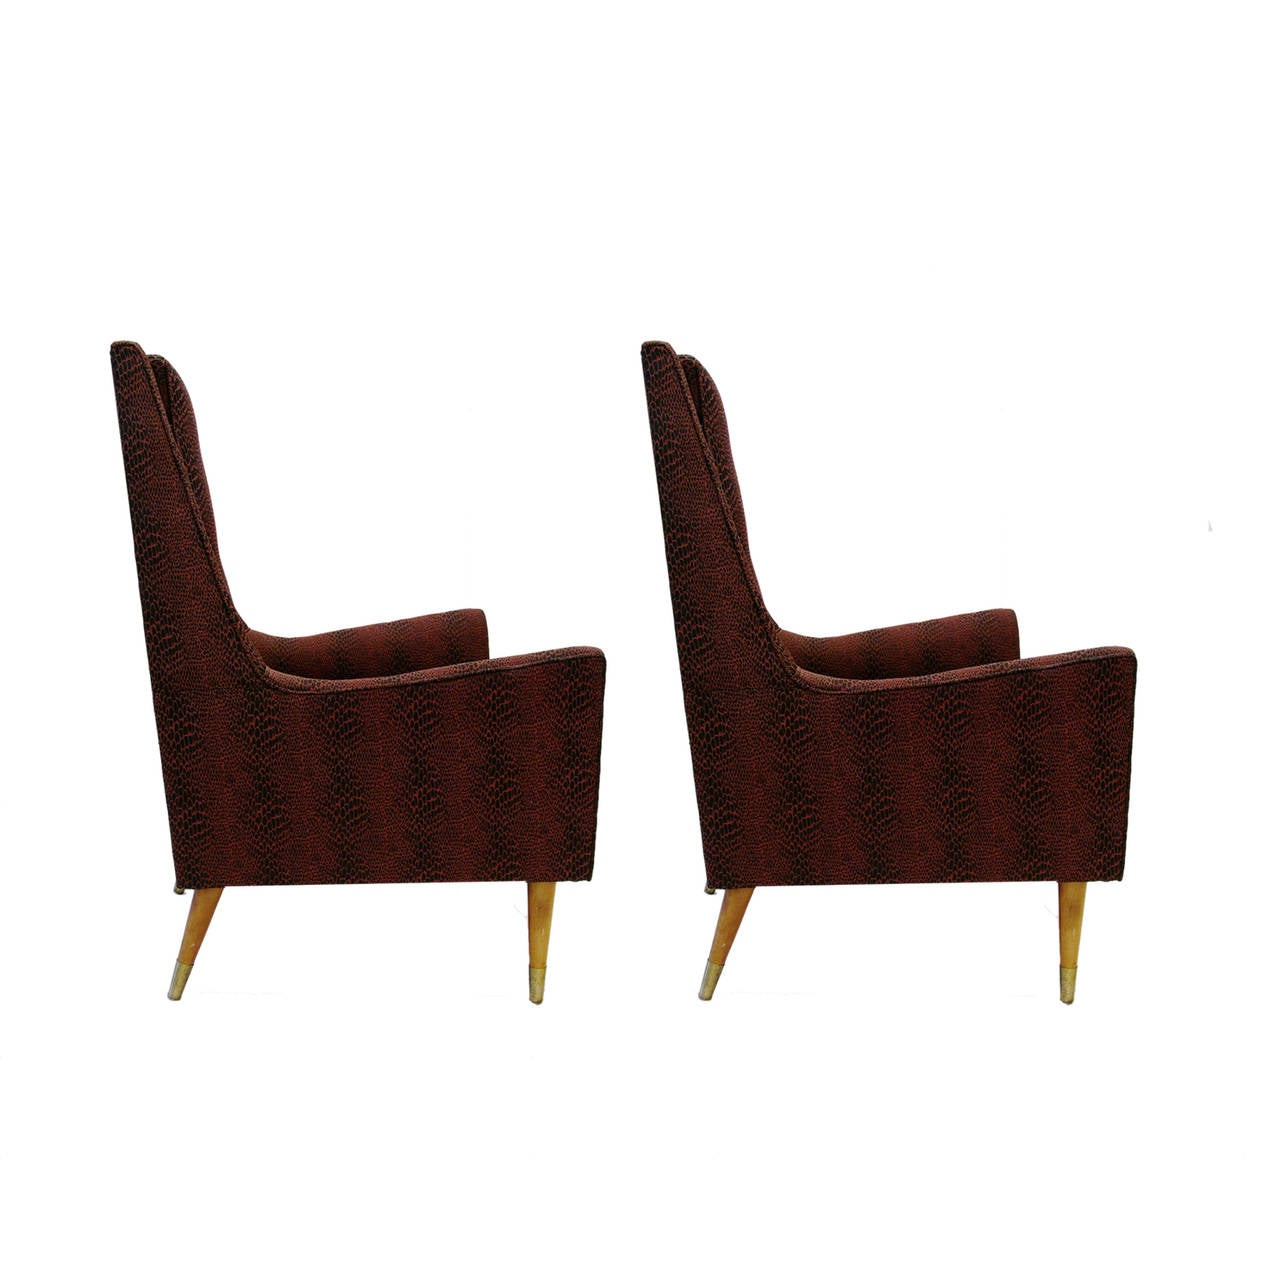 Pair of Sleek Mid-Century Modern Milo Baughman Chairs in Python Print In Good Condition In Hudson, NY